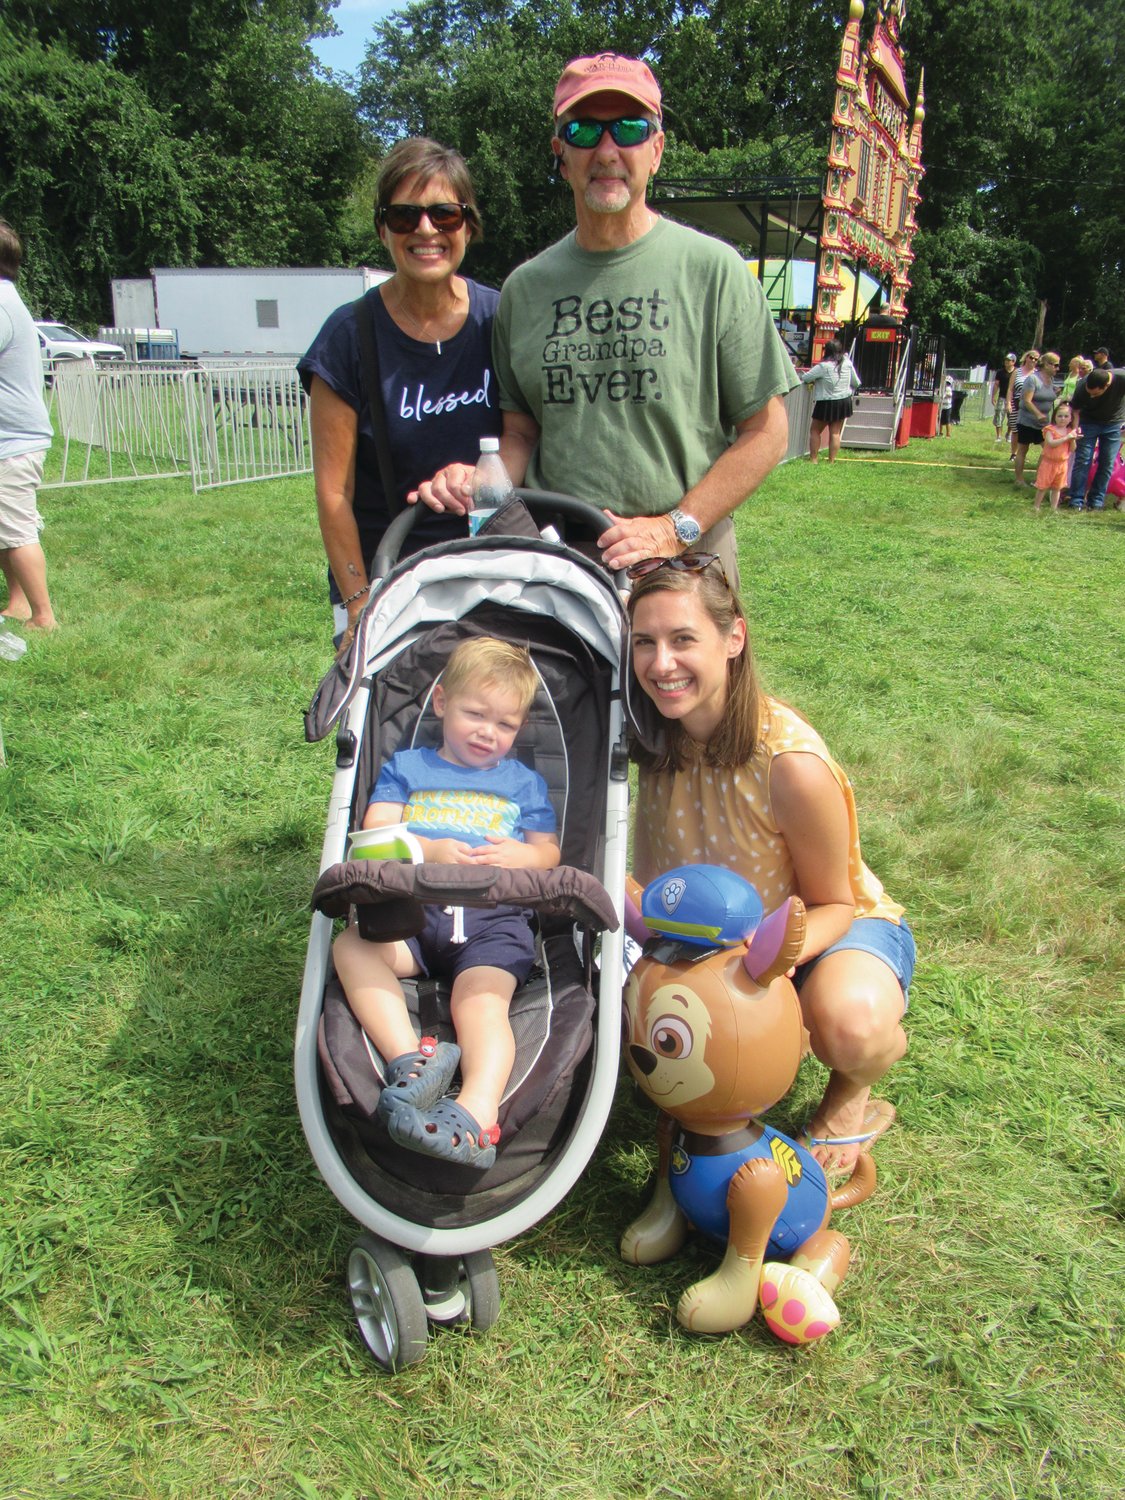 FAMILY FUN: The Joe and Judy Spremulli enjoy a time with their grandson Lucas May, 2, and his mother Jenna May during Sunday’s feast and festival.